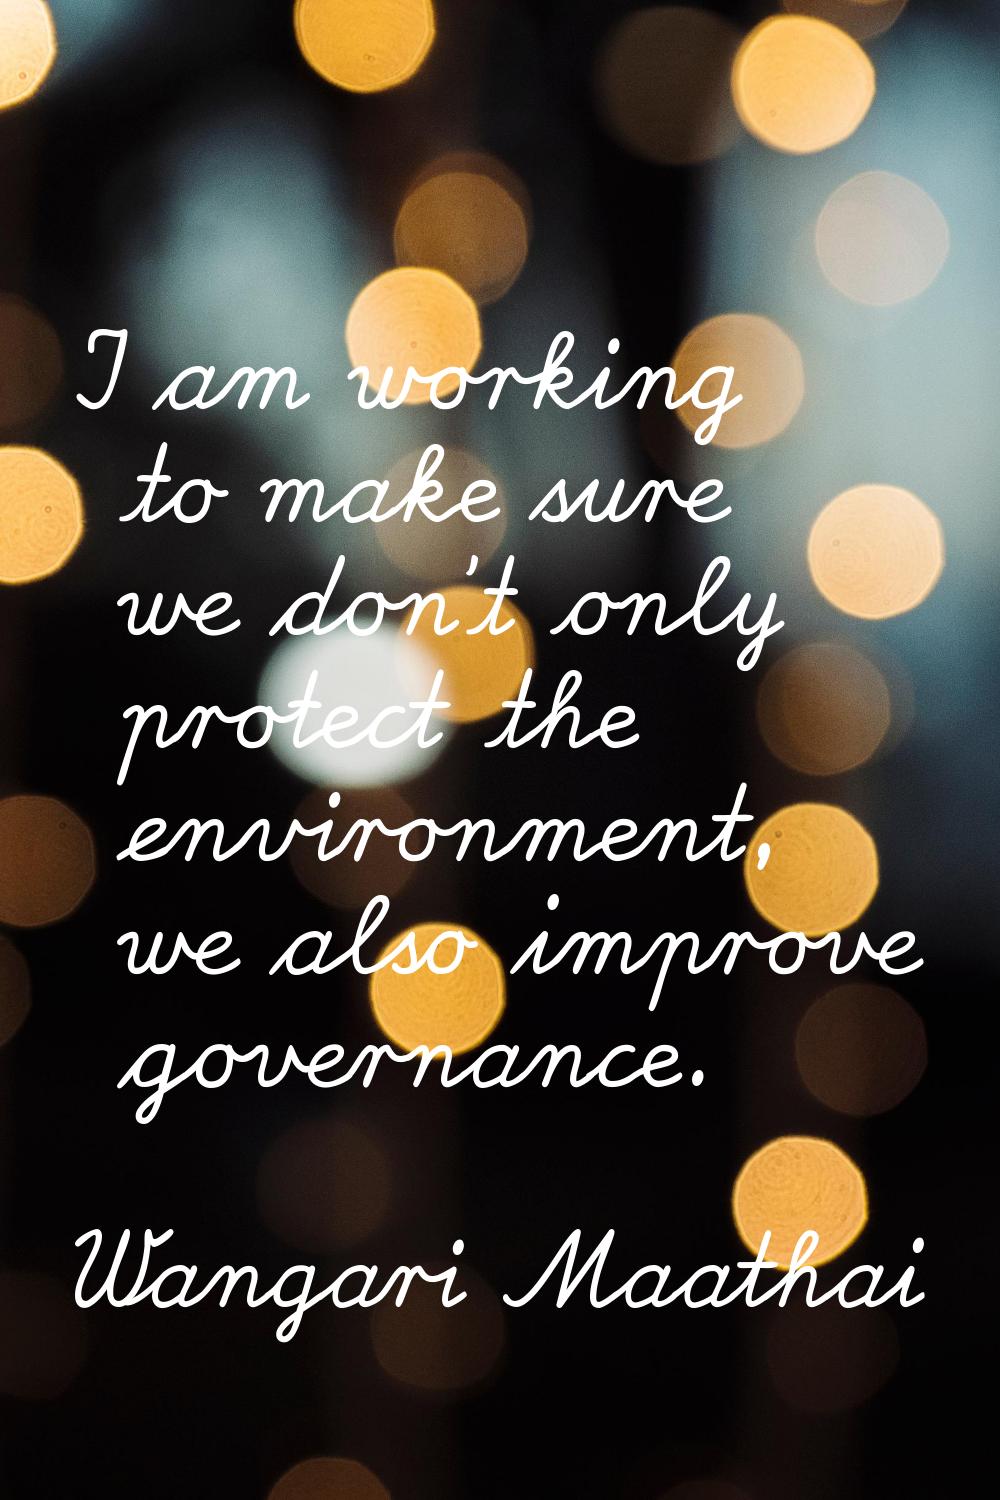 I am working to make sure we don't only protect the environment, we also improve governance.